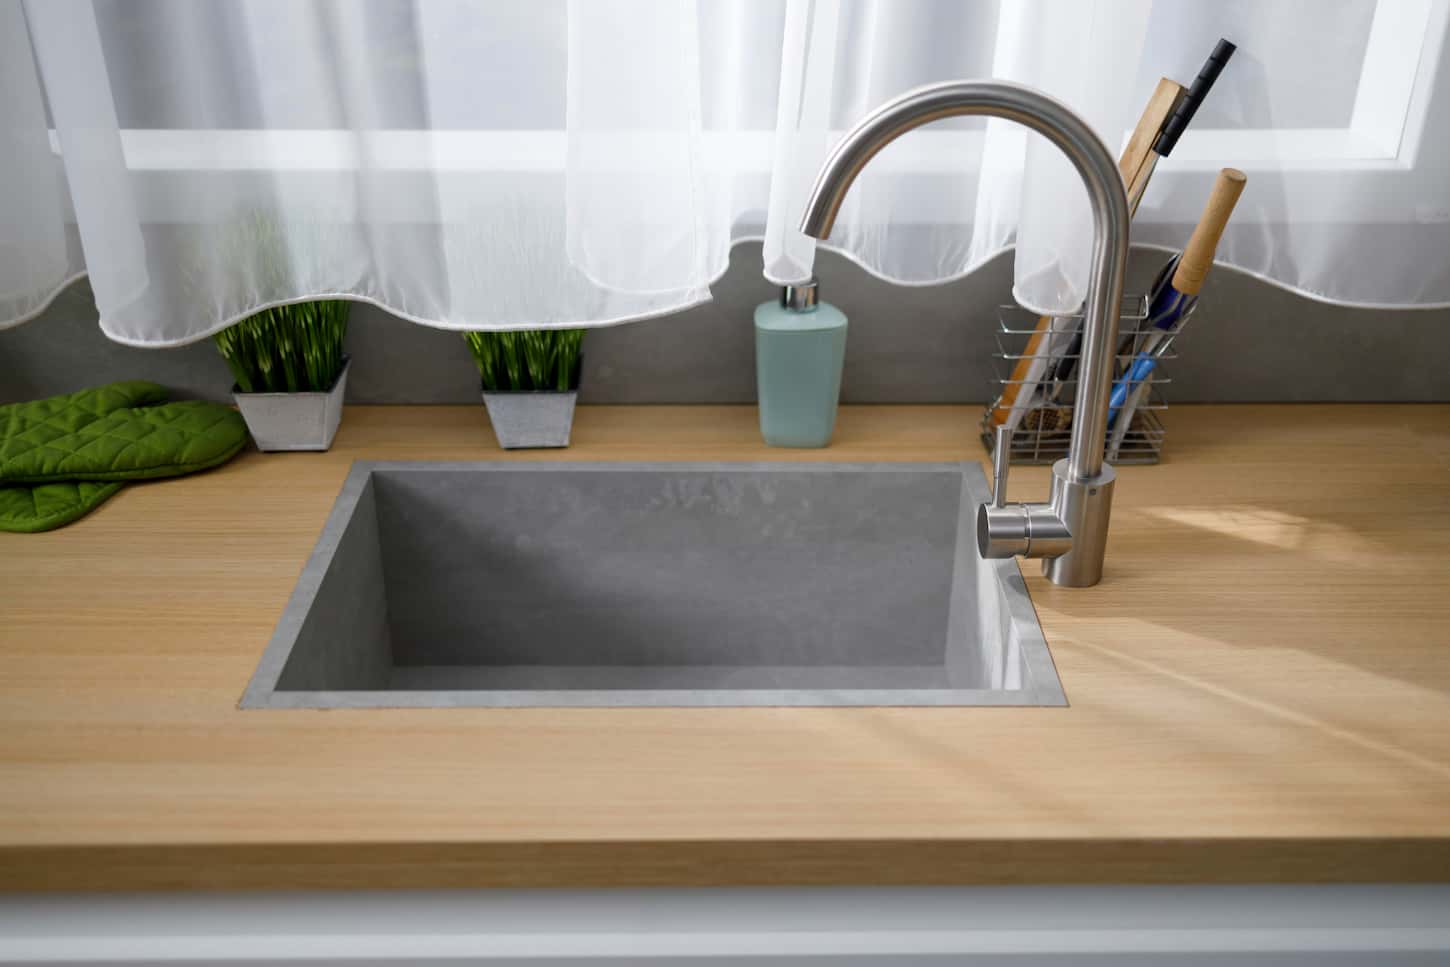 An image of a Modern kitchen sink and faucet.